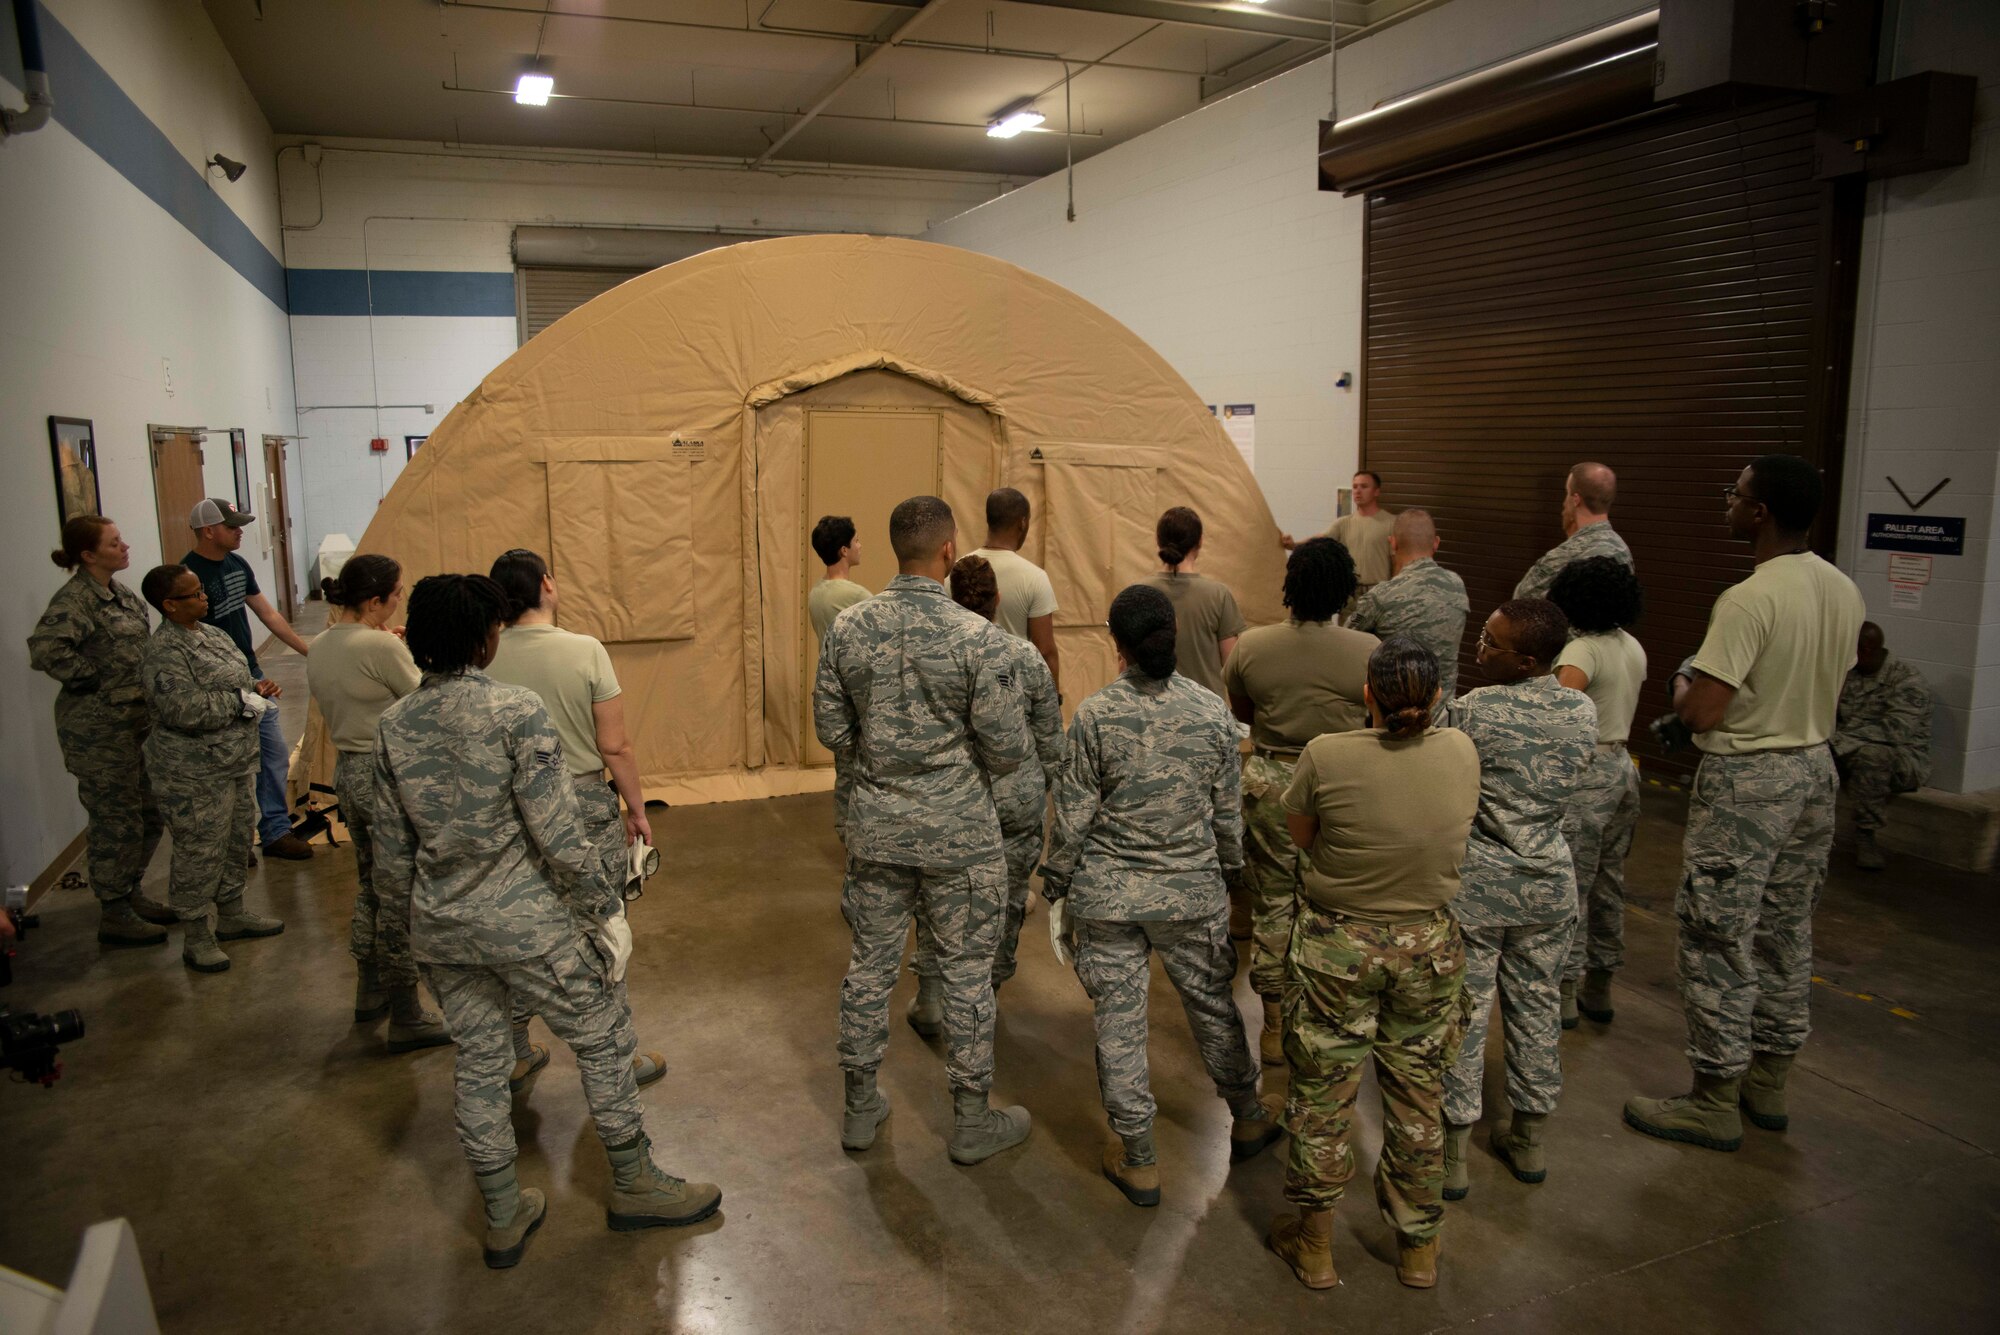 913th Force Support Squadron practices tent build operations at Little Rock Air Force Base, Ark, October 6, 2019. The ability to properly prepare and build a tent is essential for deployment or humanitarian environments. FSS provides the Air Force a range of services, from quality of life programs to combat support operations. (U.S. Air Force Reserve photo by Senior Airman Chase Cannon)